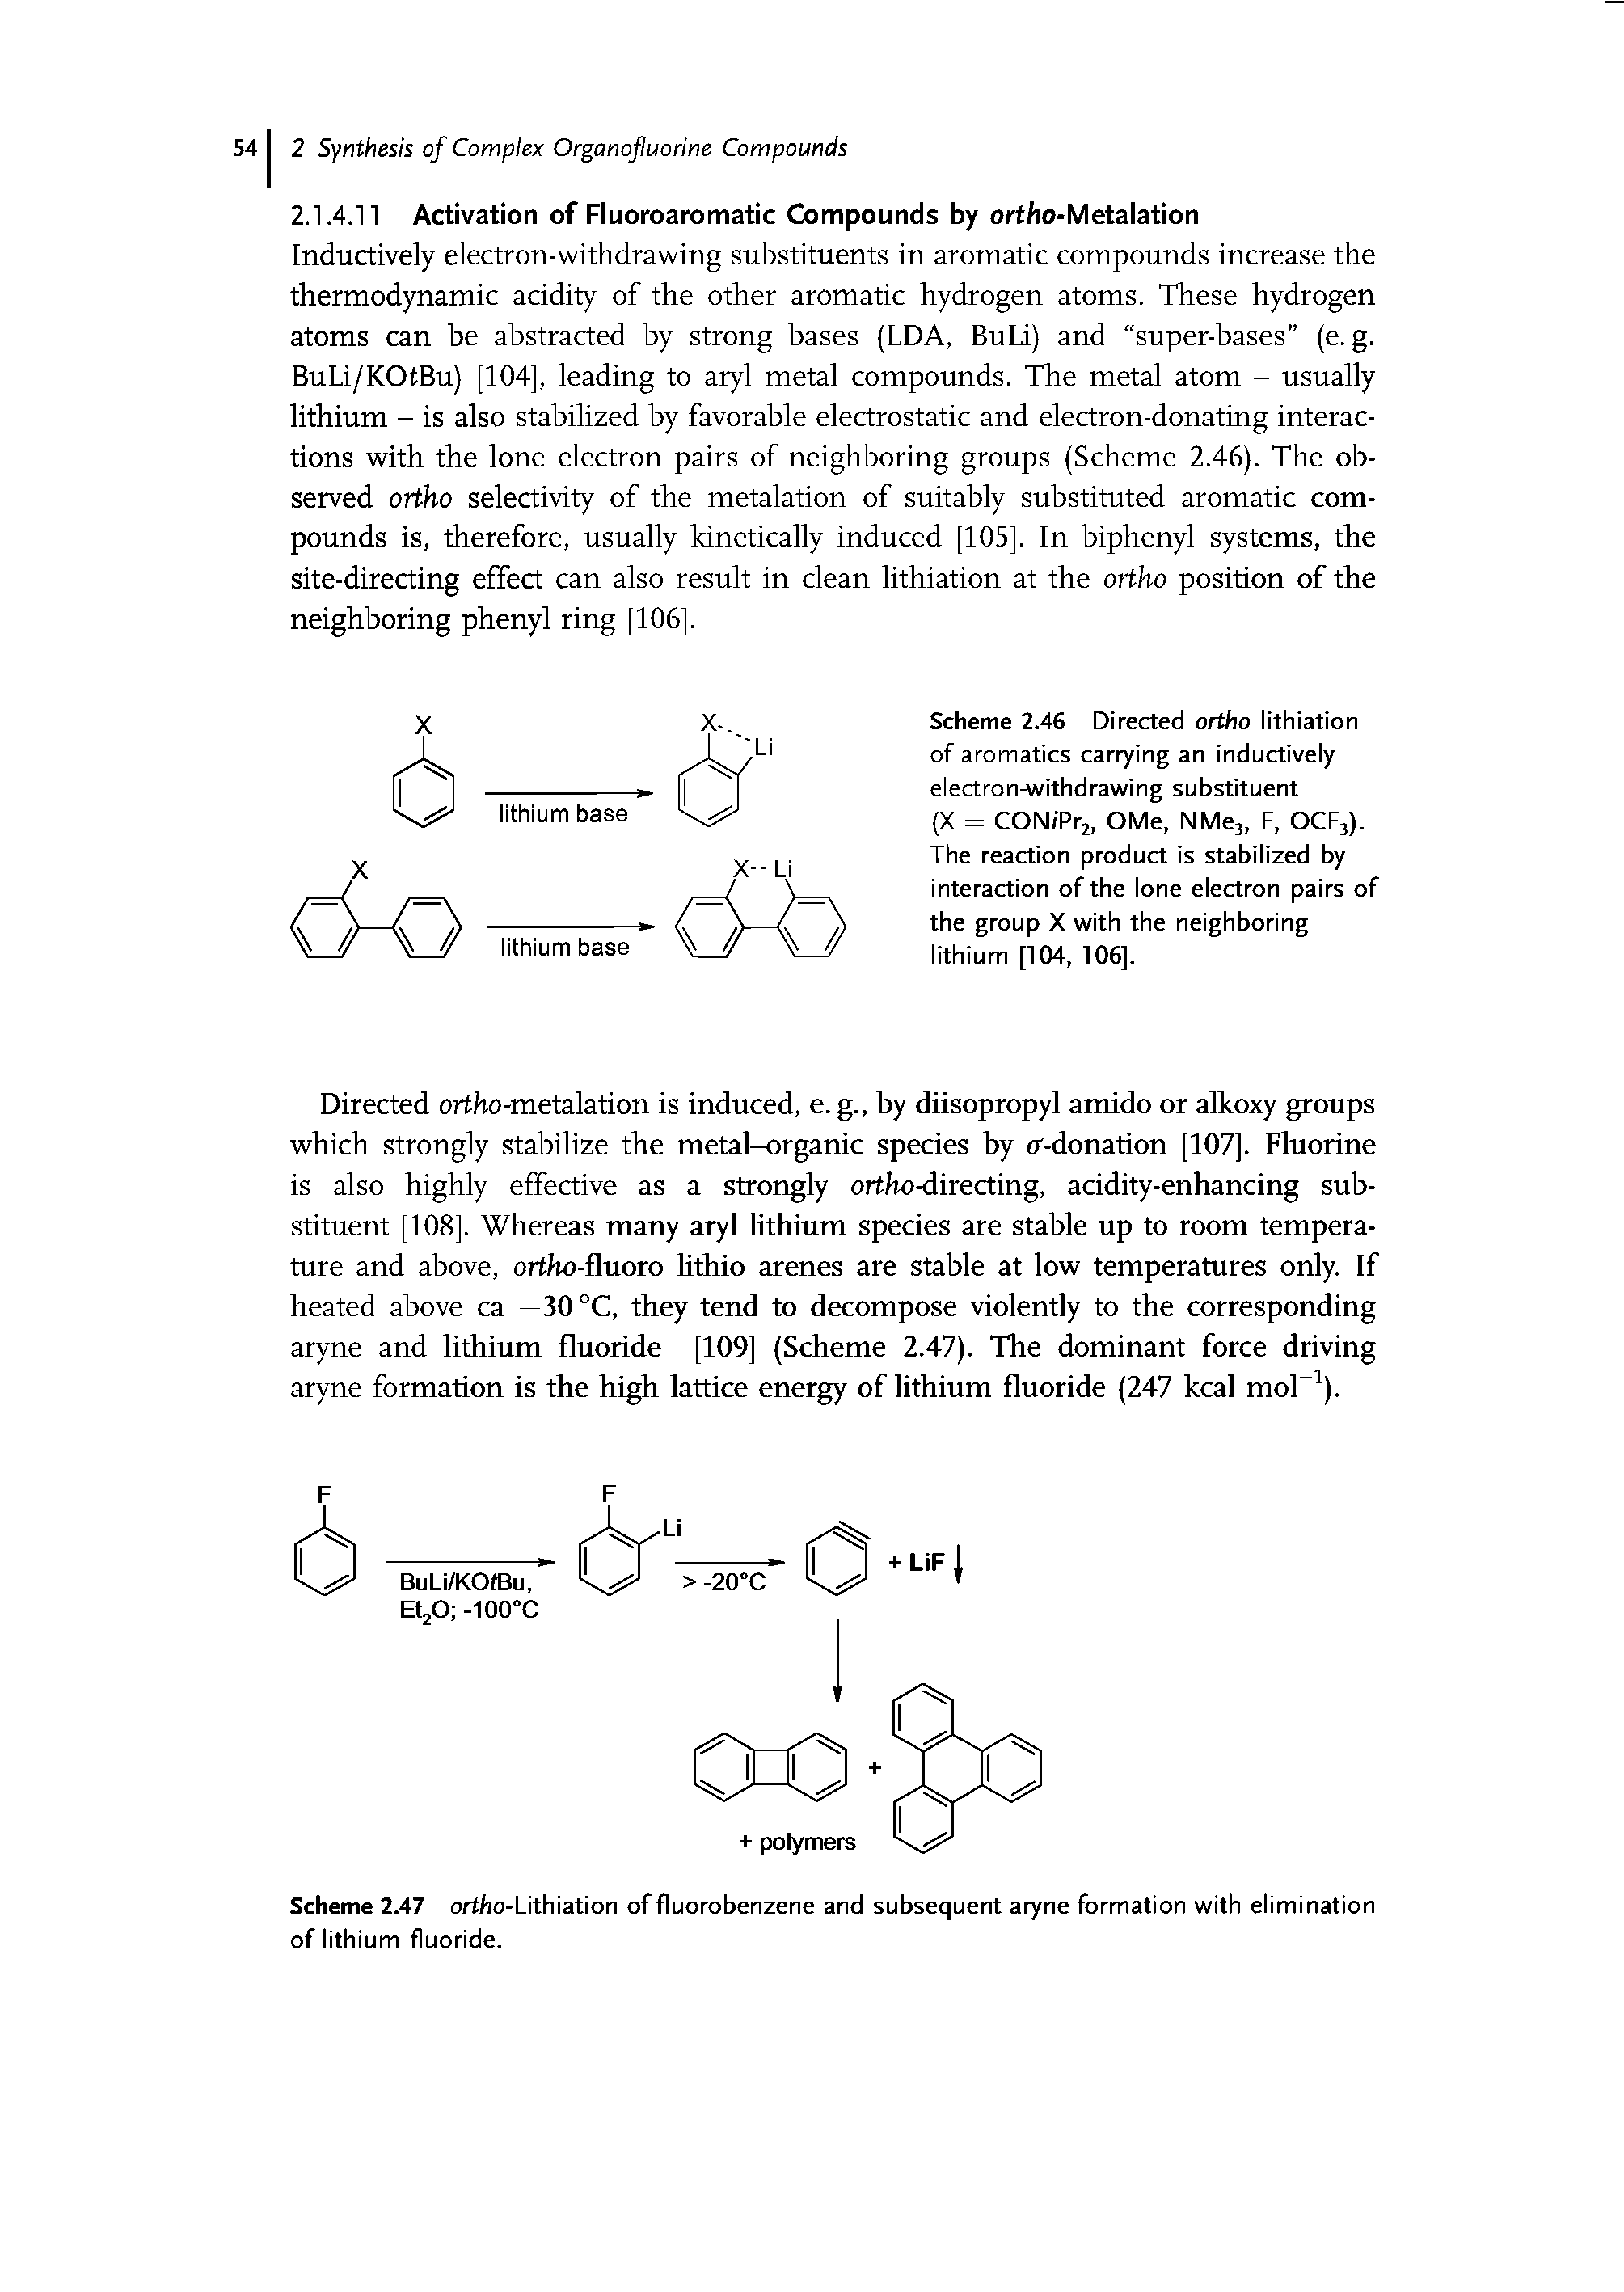 Scheme 2.46 Directed ortho lithiation of aromatics carrying an inductively electron-withdrawing substituent (X = CON/Pr2, OMe, NMe, F, OCF,). The reaction product is stabilized by interaction of the lone electron pairs of the group X with the neighboring lithium [104, 106].